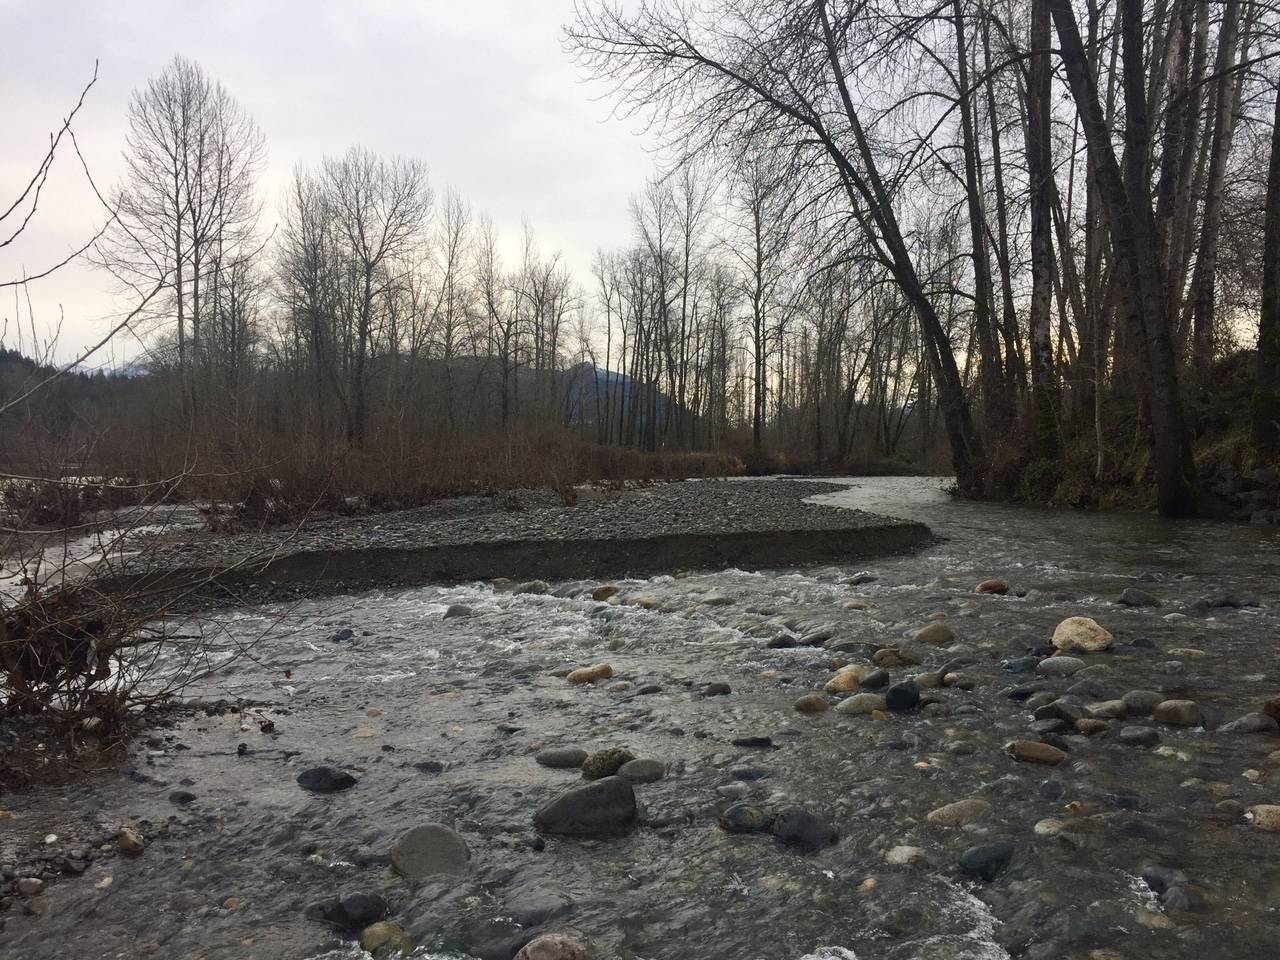 Photo by William Shaw
Mouth of the Raging River where it flows into the Snoqualmie River, just east of the Fall City Bridge, on the morning of Tuesday, Jan. 5.